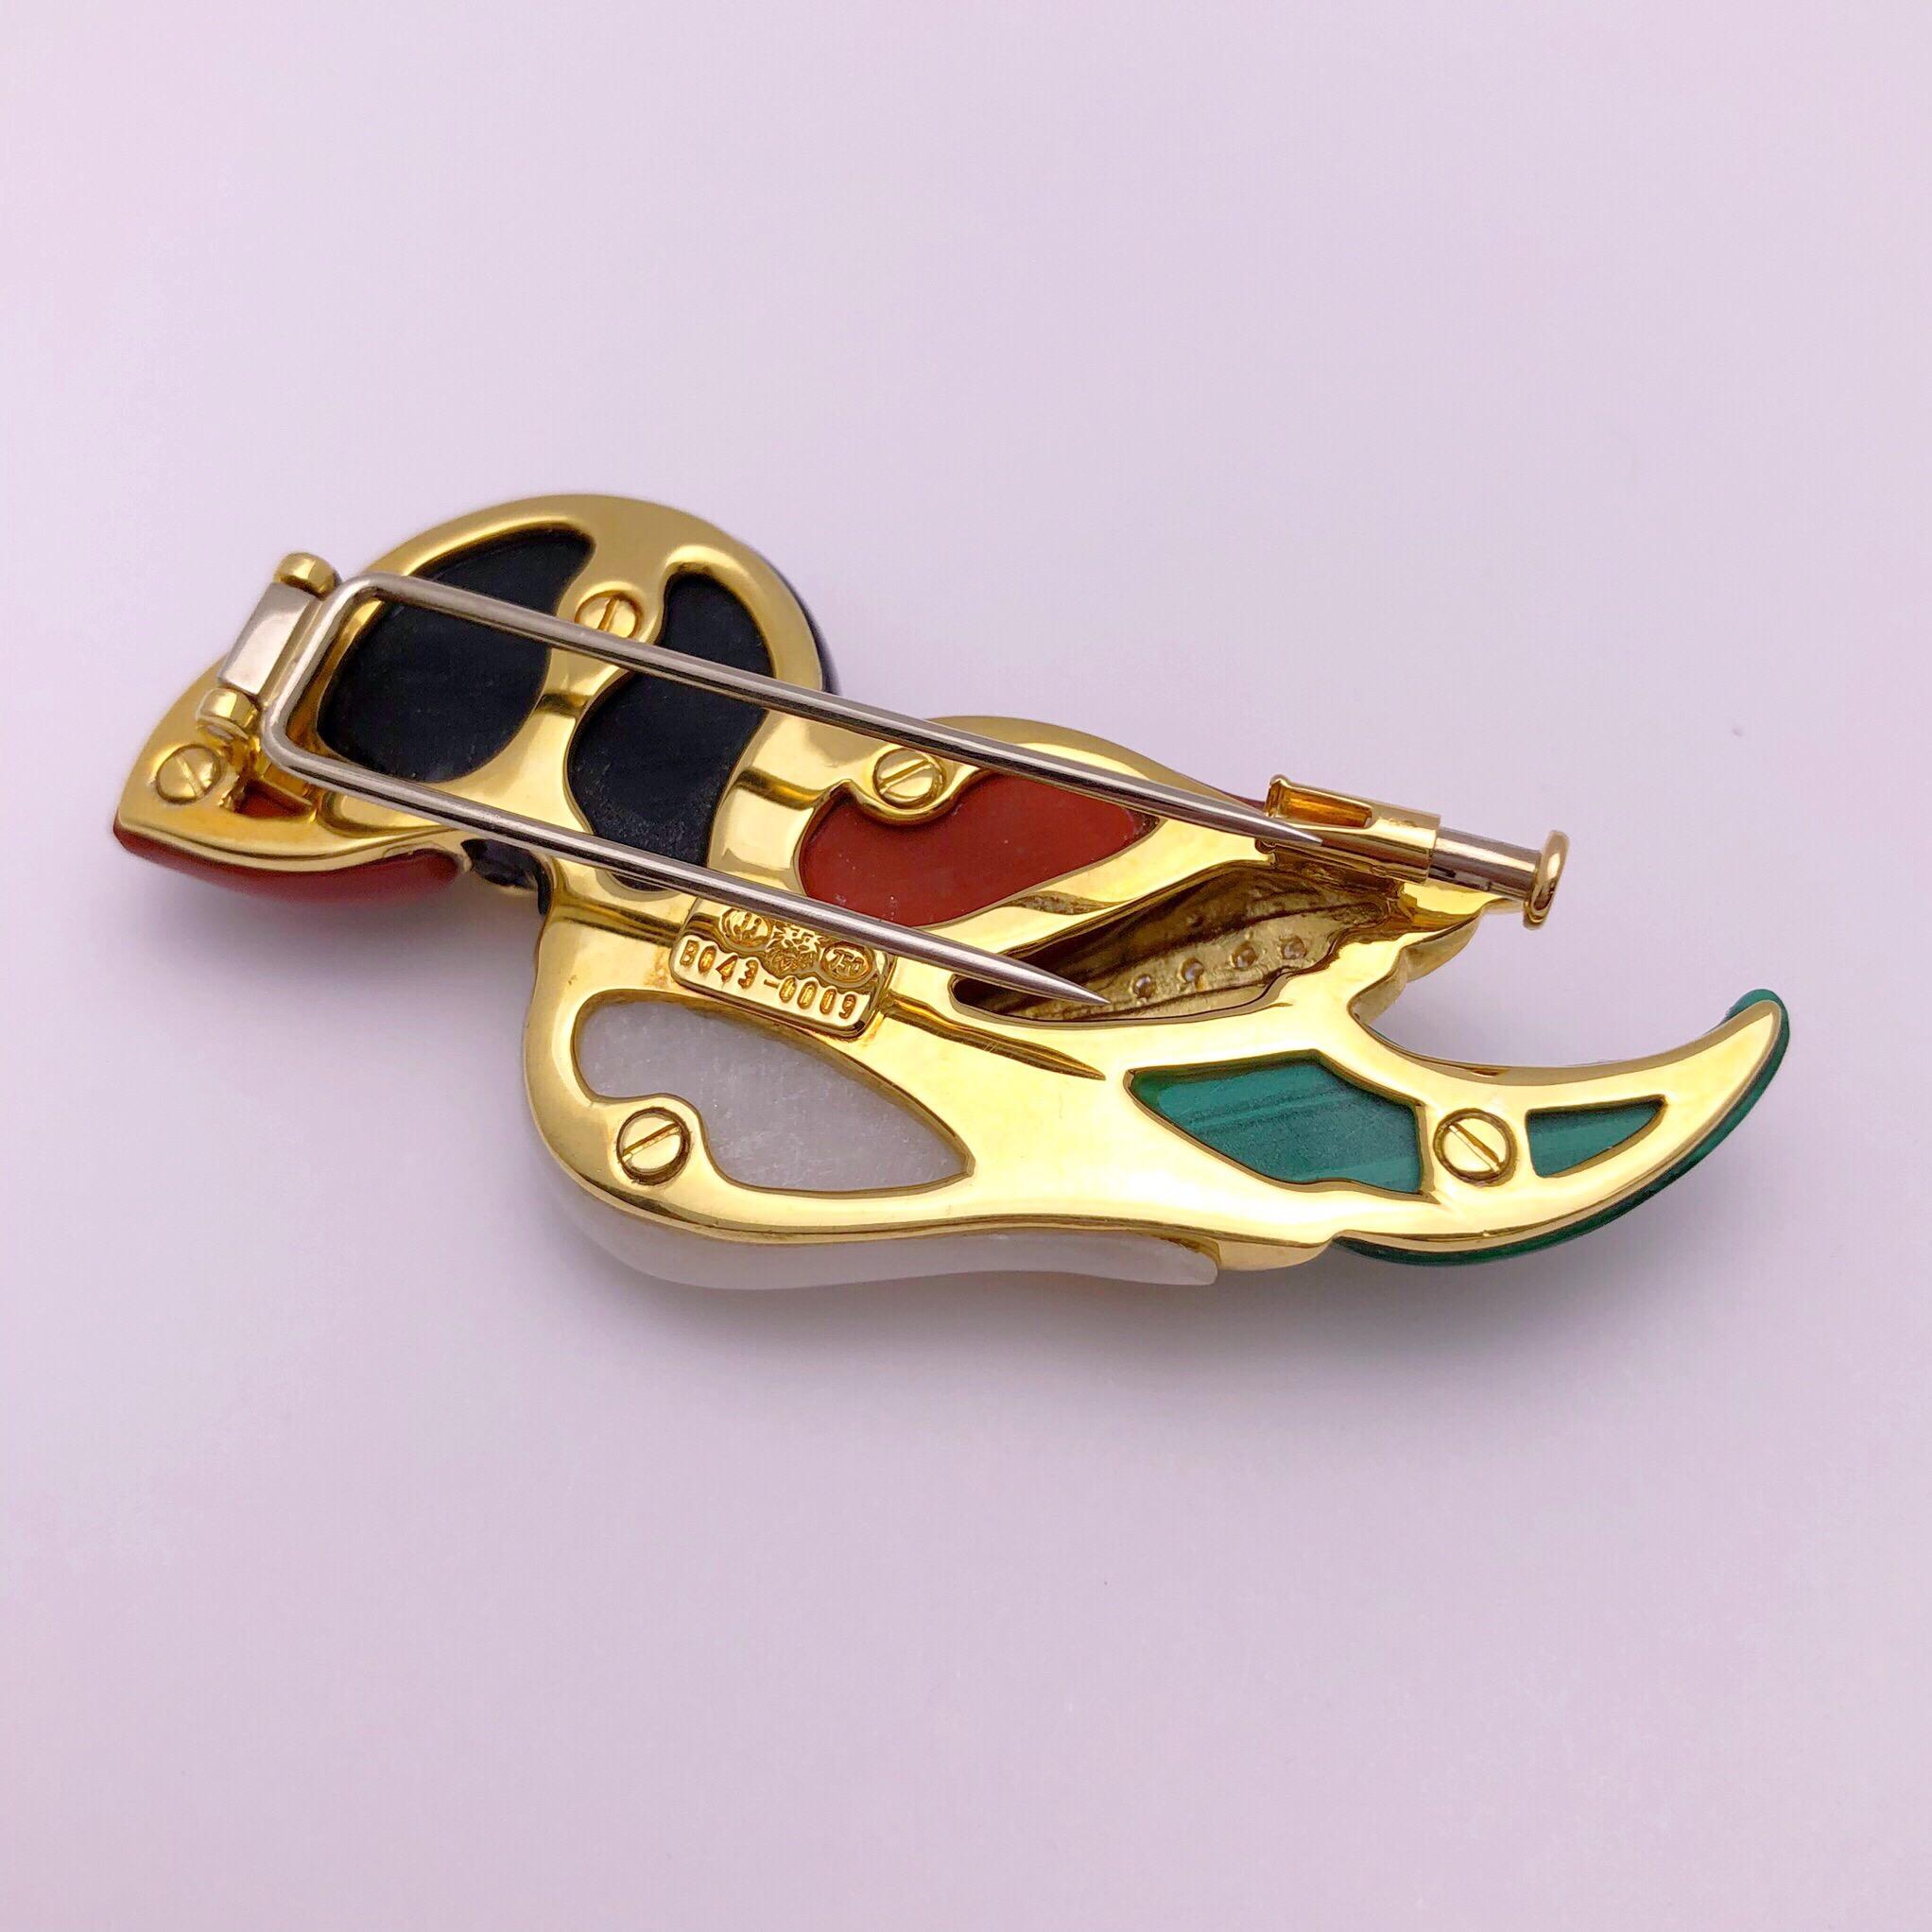 A true work of craftsmanship is the best way to describe this Puffin brooch. Smooth and hand polished stones of Jasper, Agate, Malachite and Onyx form the sculptural birds body. White round brilliant diamonds weighing 0.14 carats are set in the